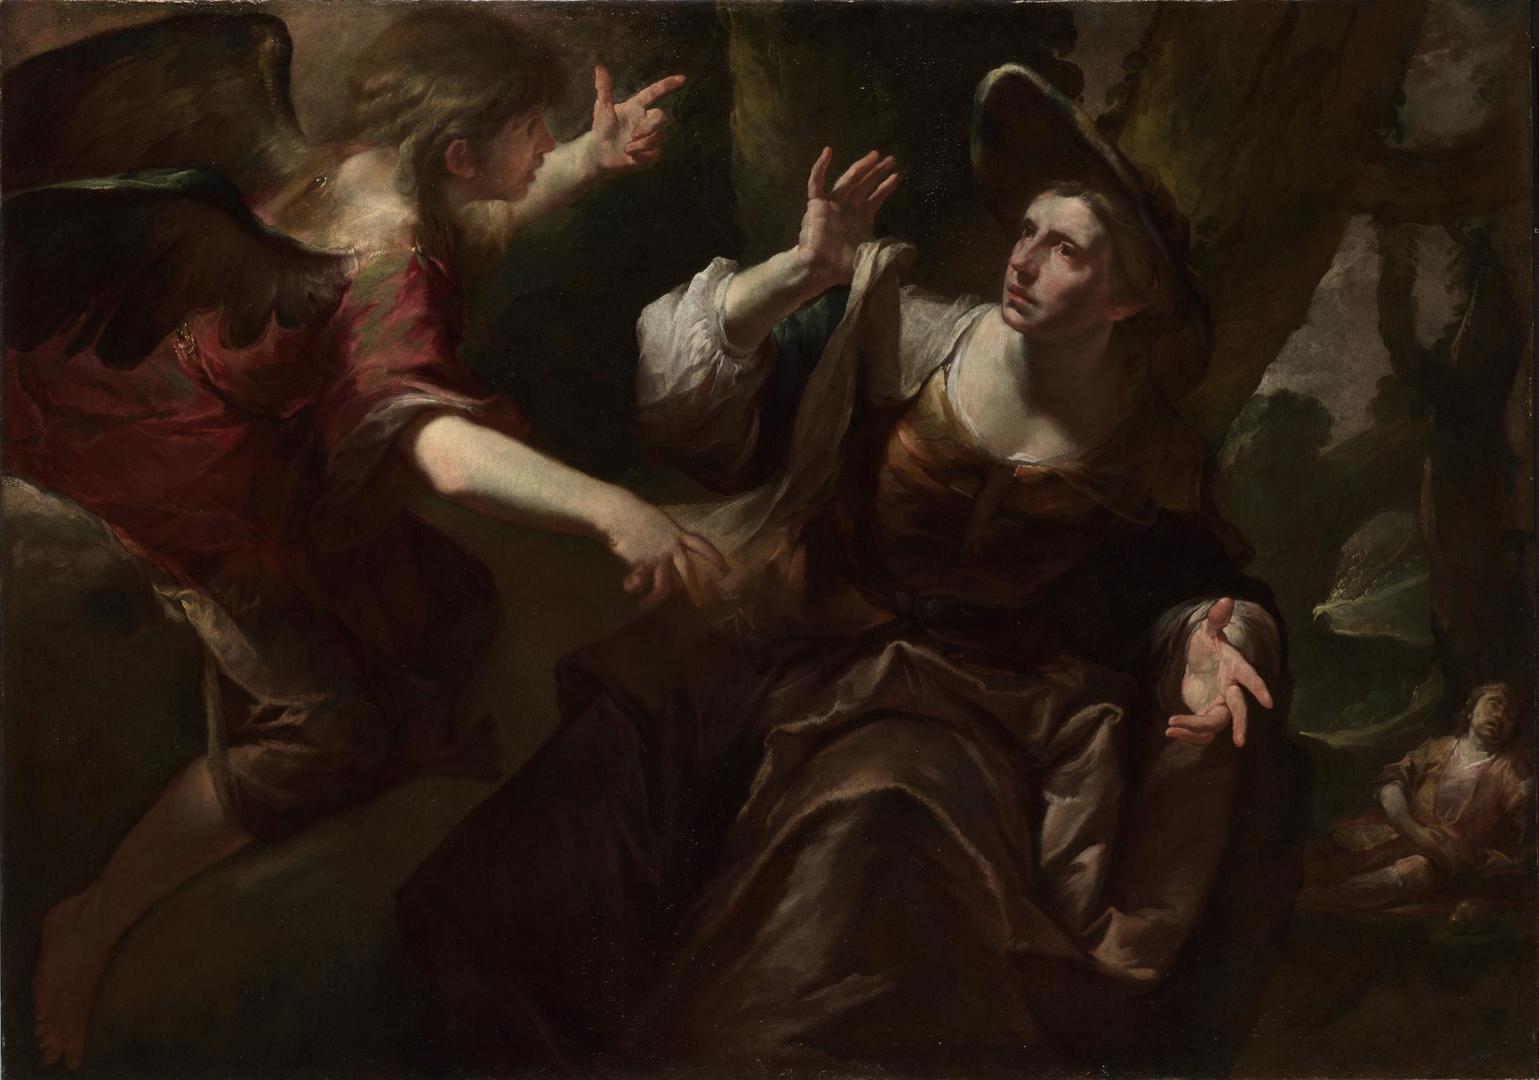 The Angel appears to Hagar and Ishmael by Gioacchino Assereto